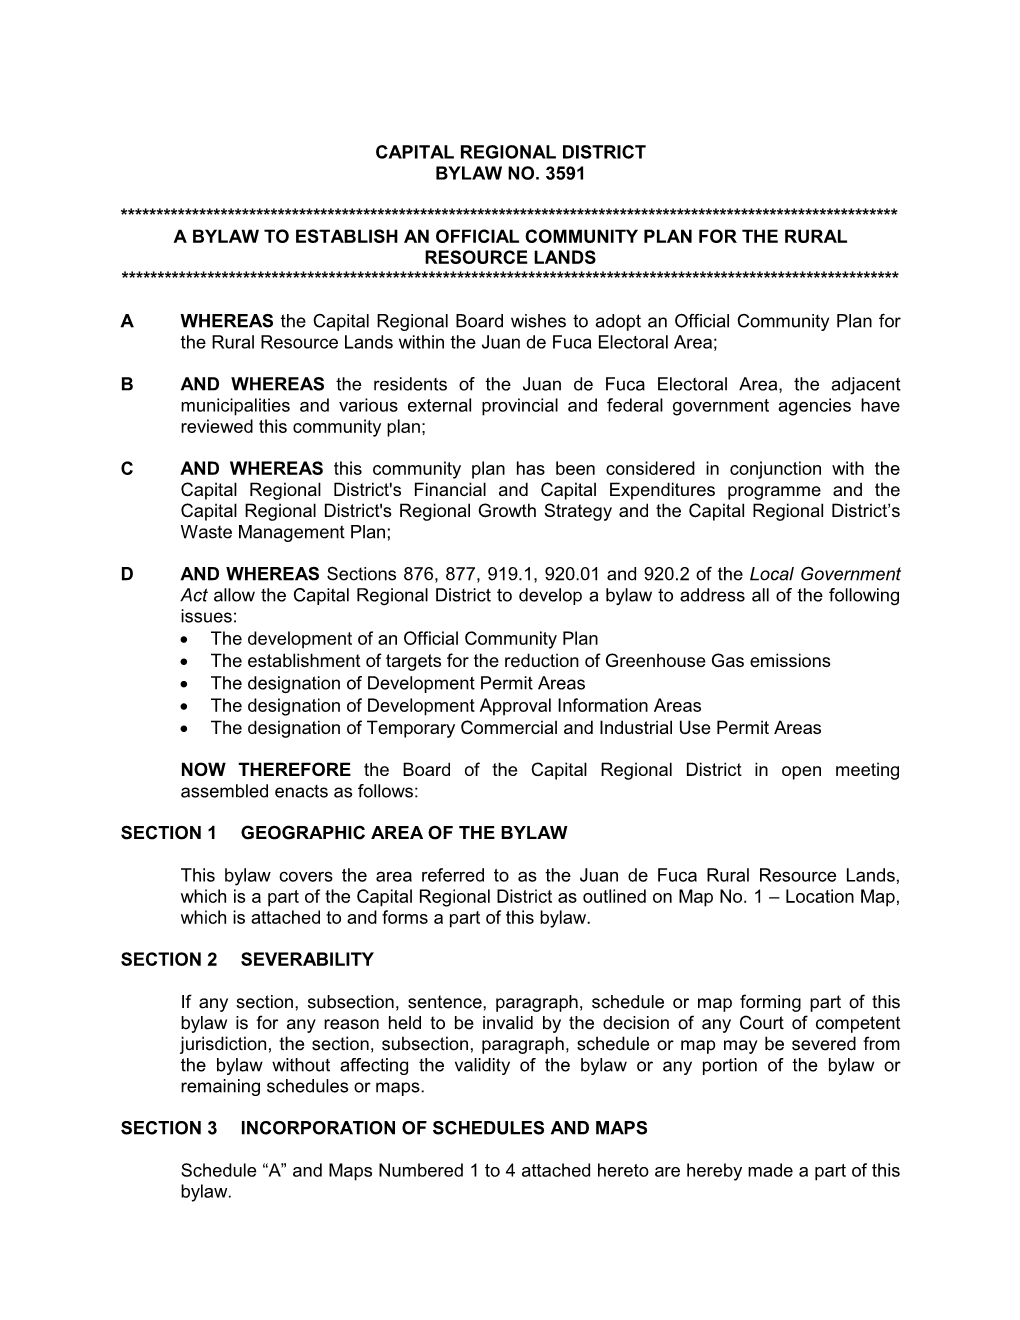 Official Community Plan for the Rural Resource Lands, Bylaw No. 1, 2009"